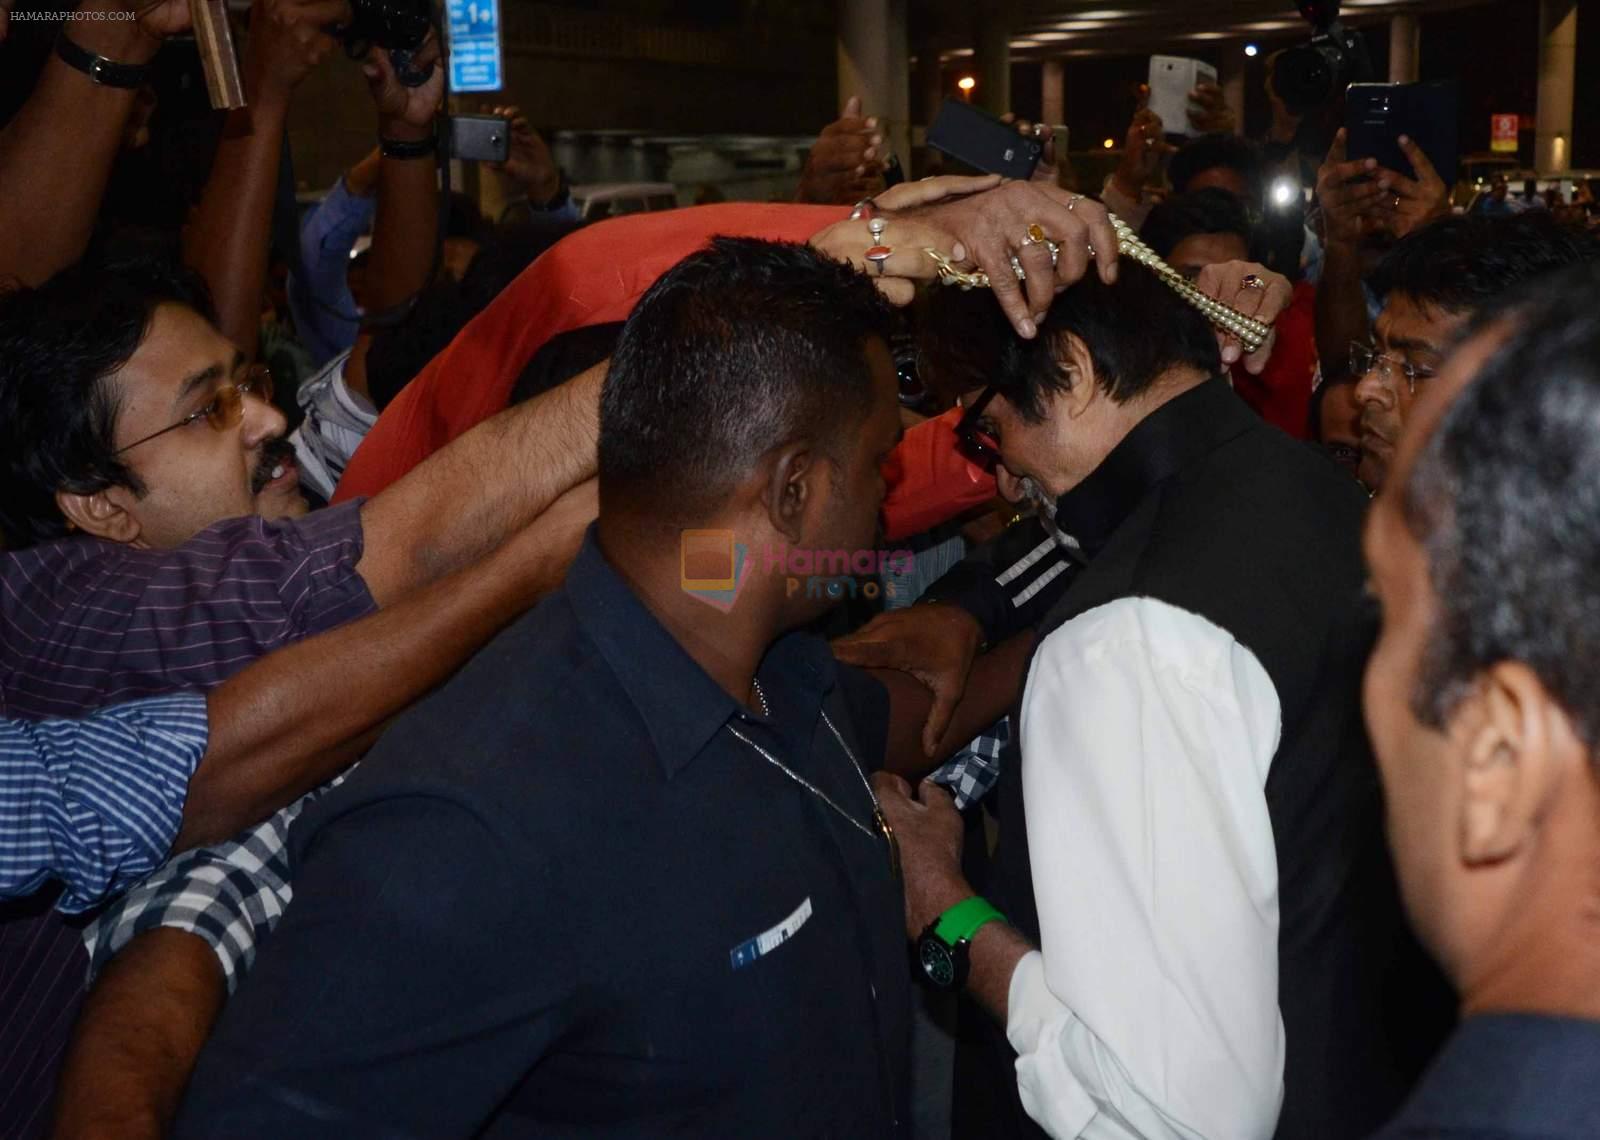 Amitabh Bachchan in Kolkata post Piku gets amazing welcome at airport by fans on 26th Nov 2015